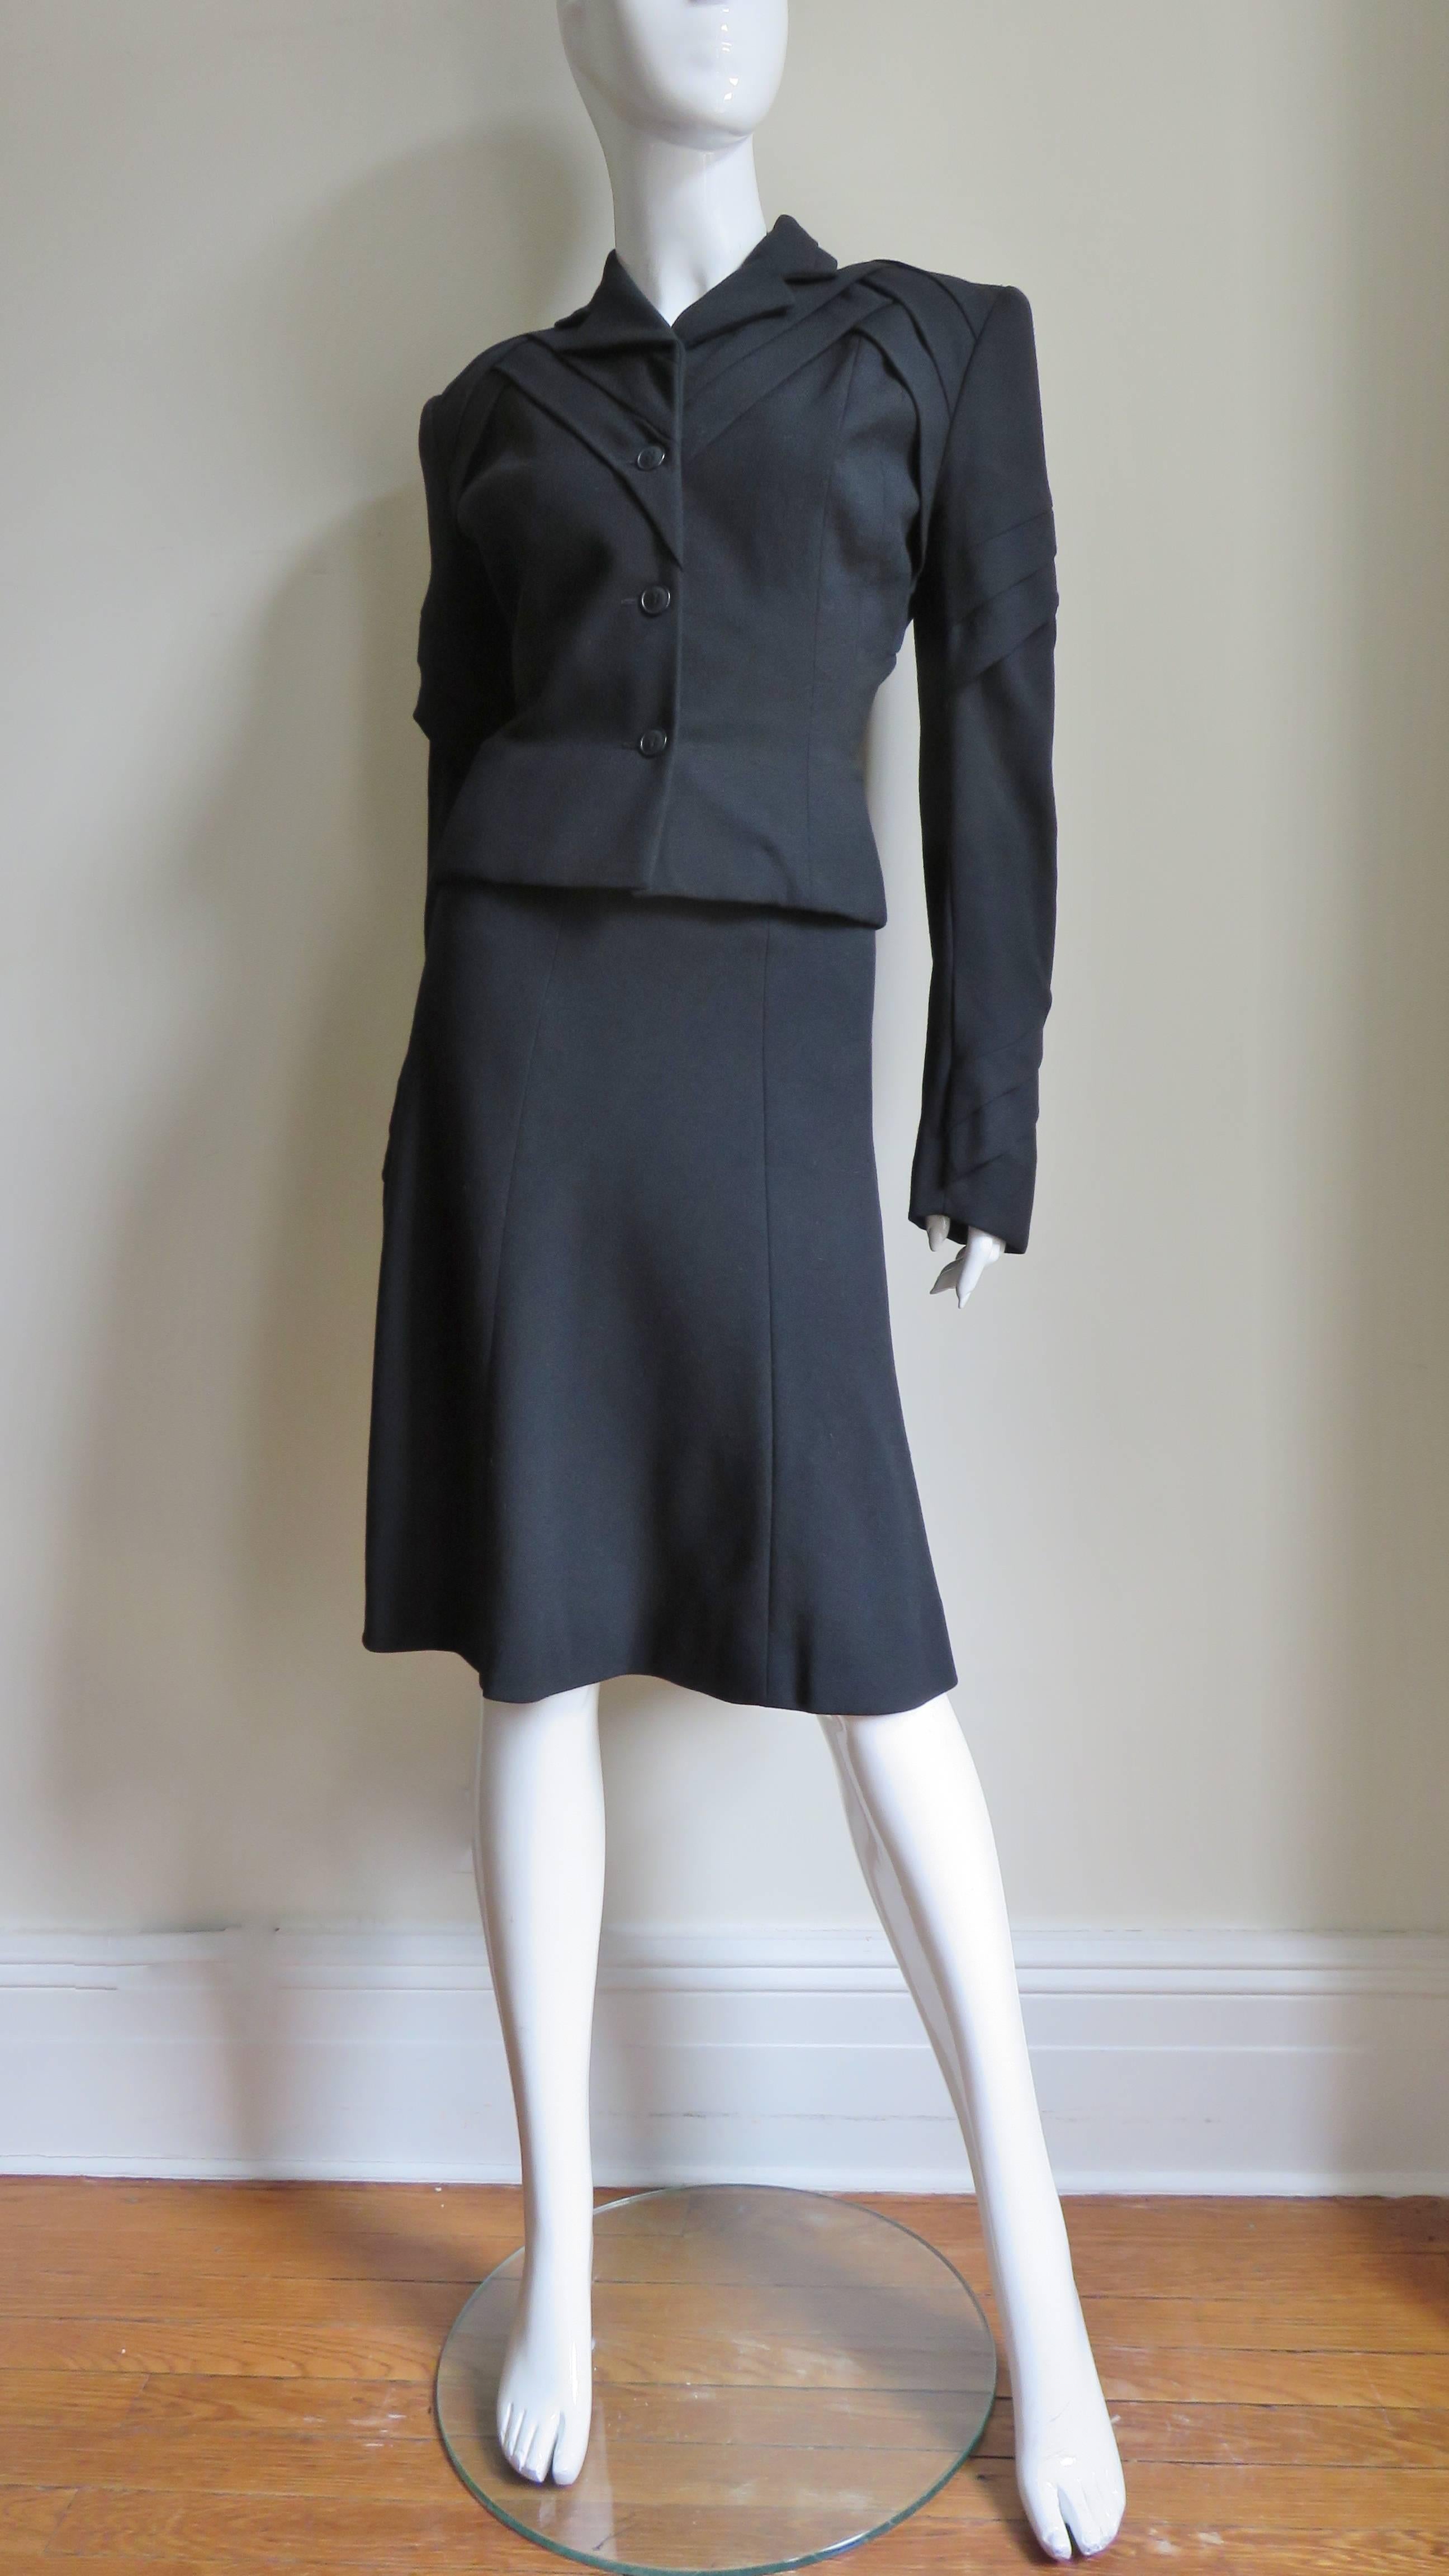 John Galliano New Runway Skirt Suit with Elaborate Detail 1990s For Sale 1